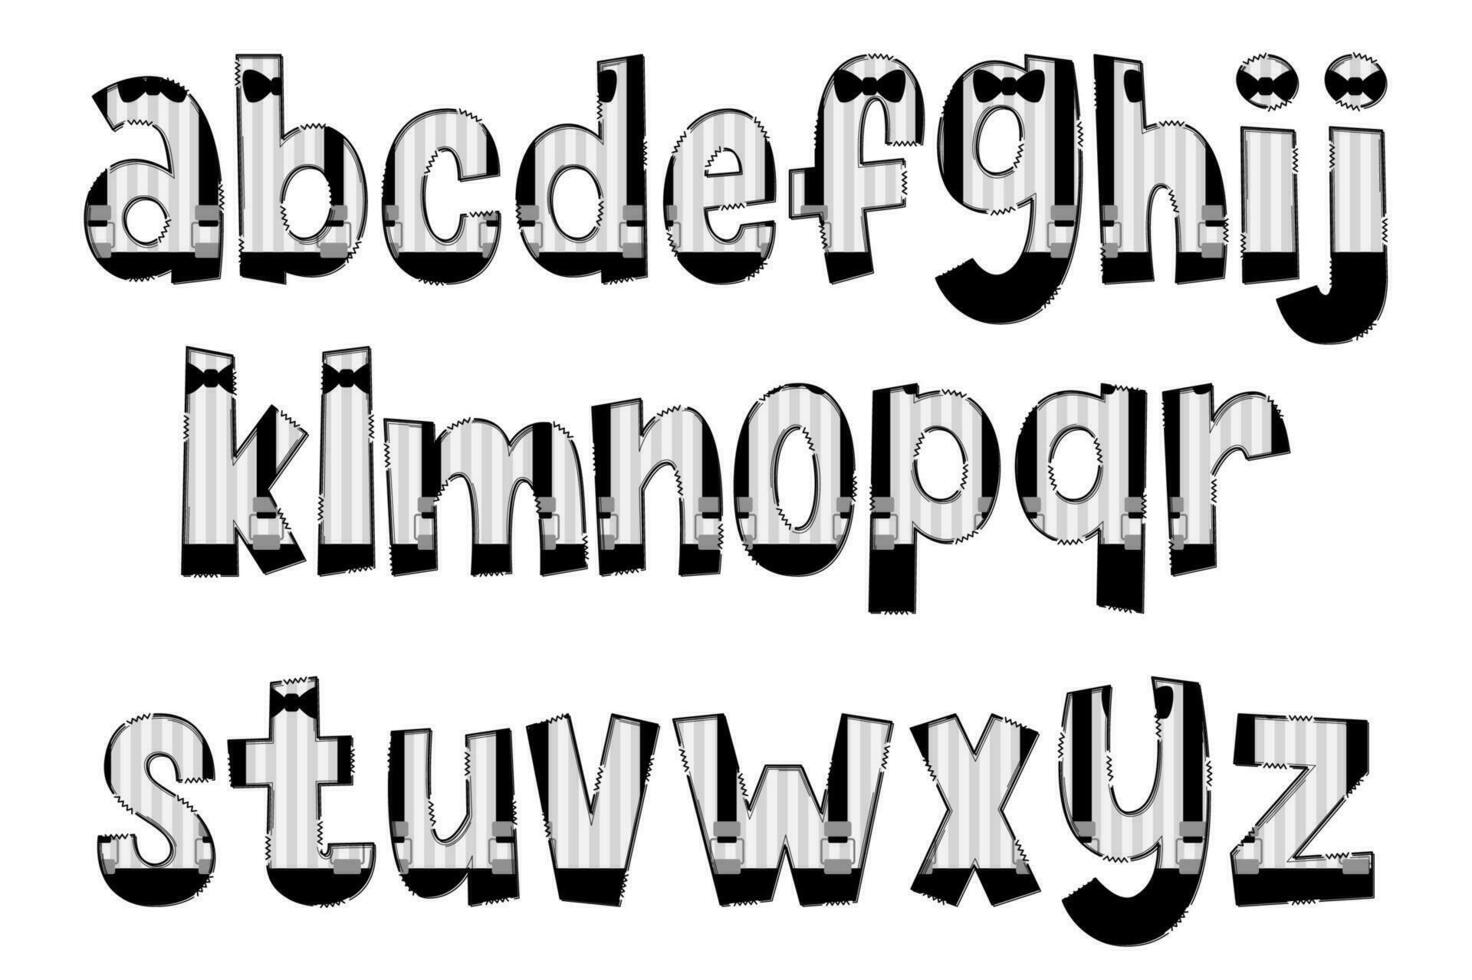 Handcrafted Little Man Letters. Color Creative Art Typographic Design vector